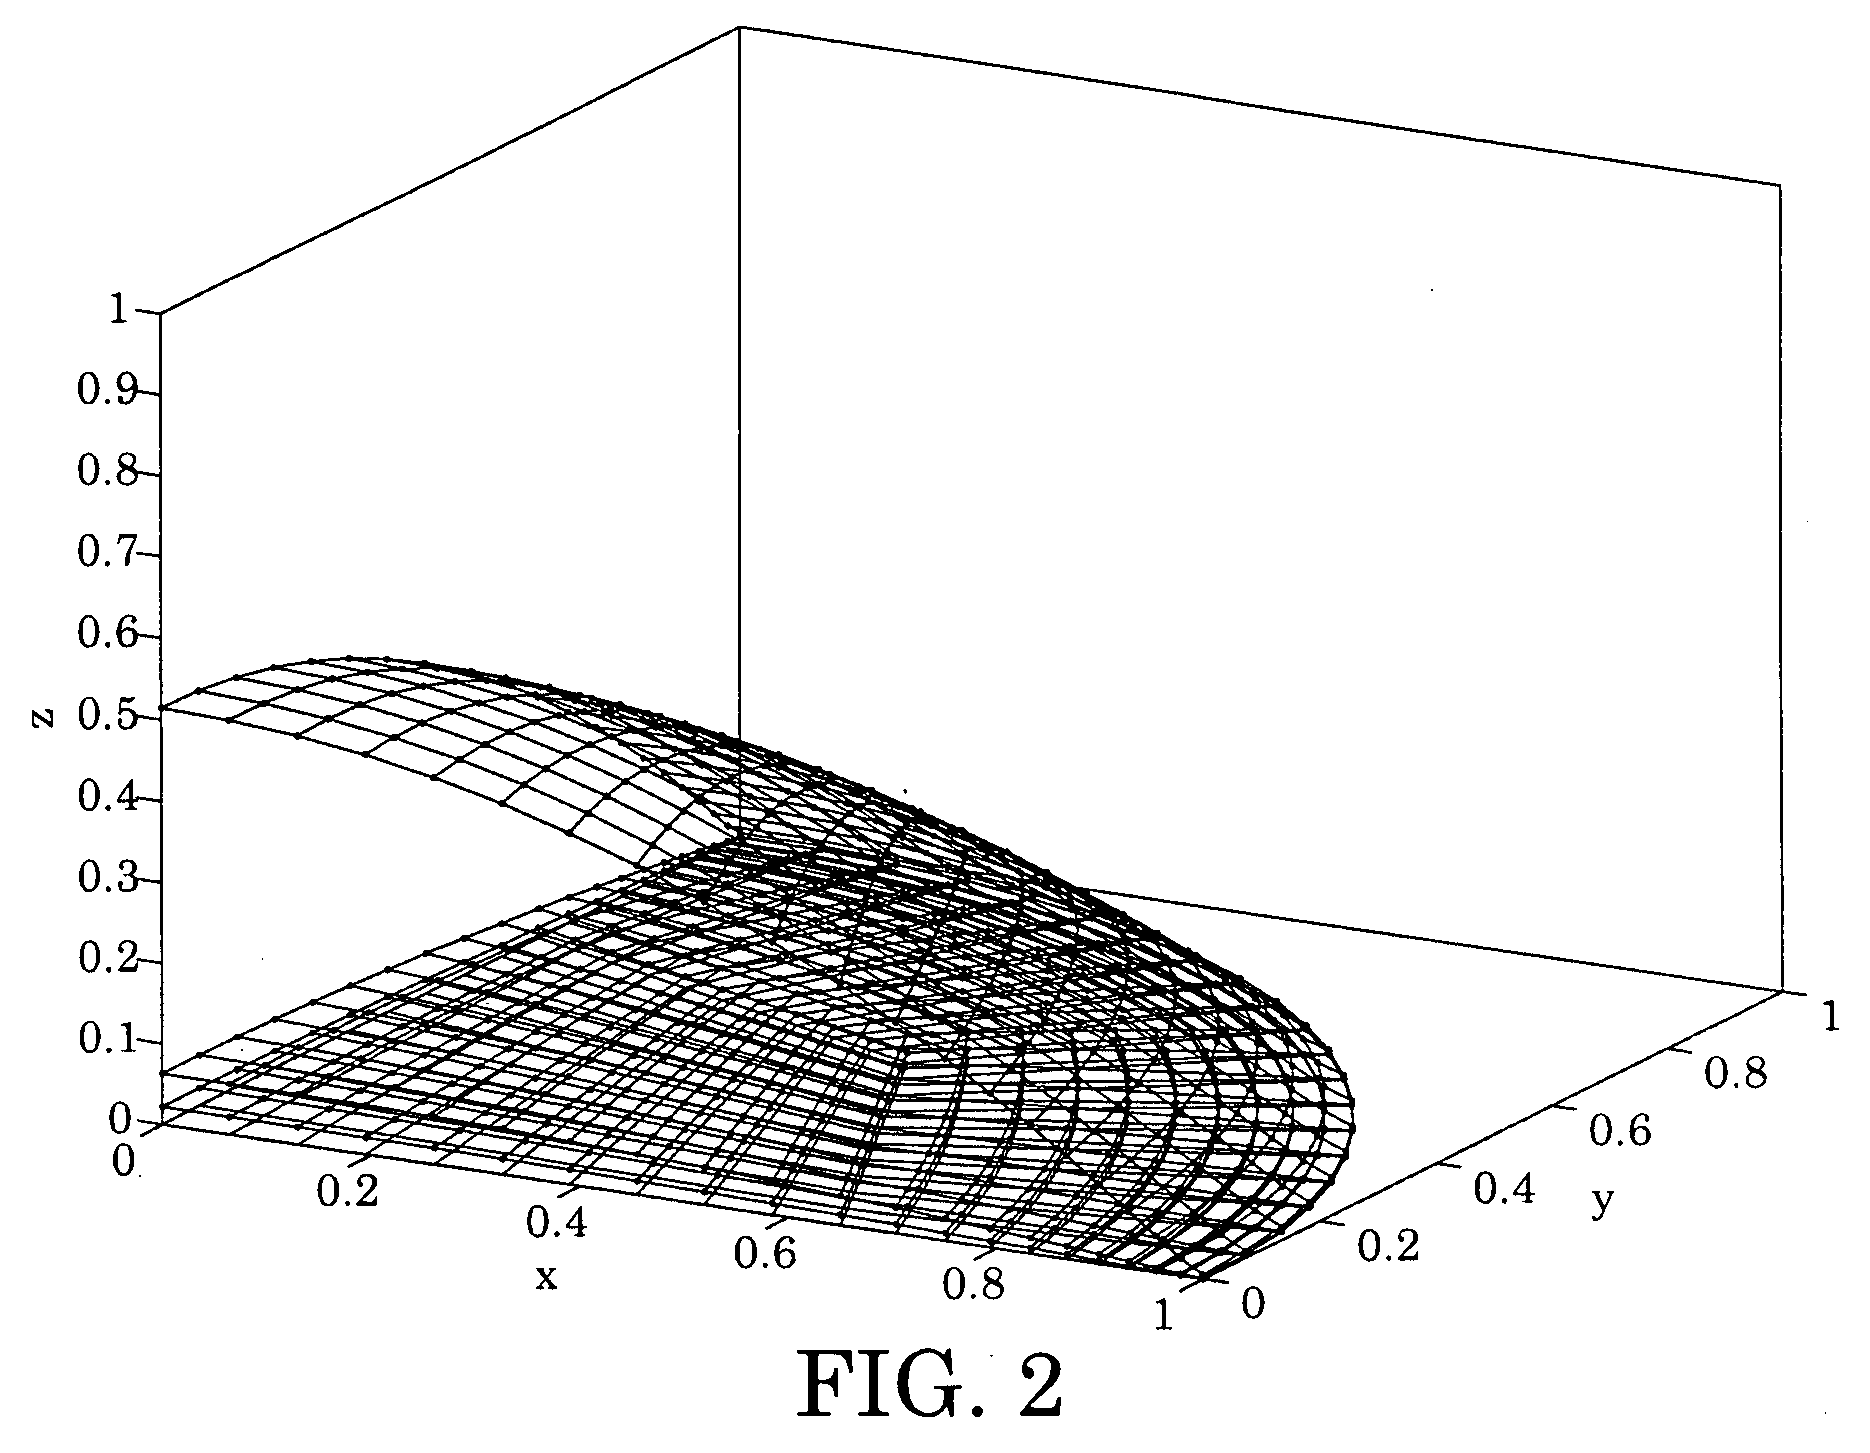 Finite Element Algorithm for Solving a Fourth Order Nonlinear Lubrication Equation for Droplet Evaporation